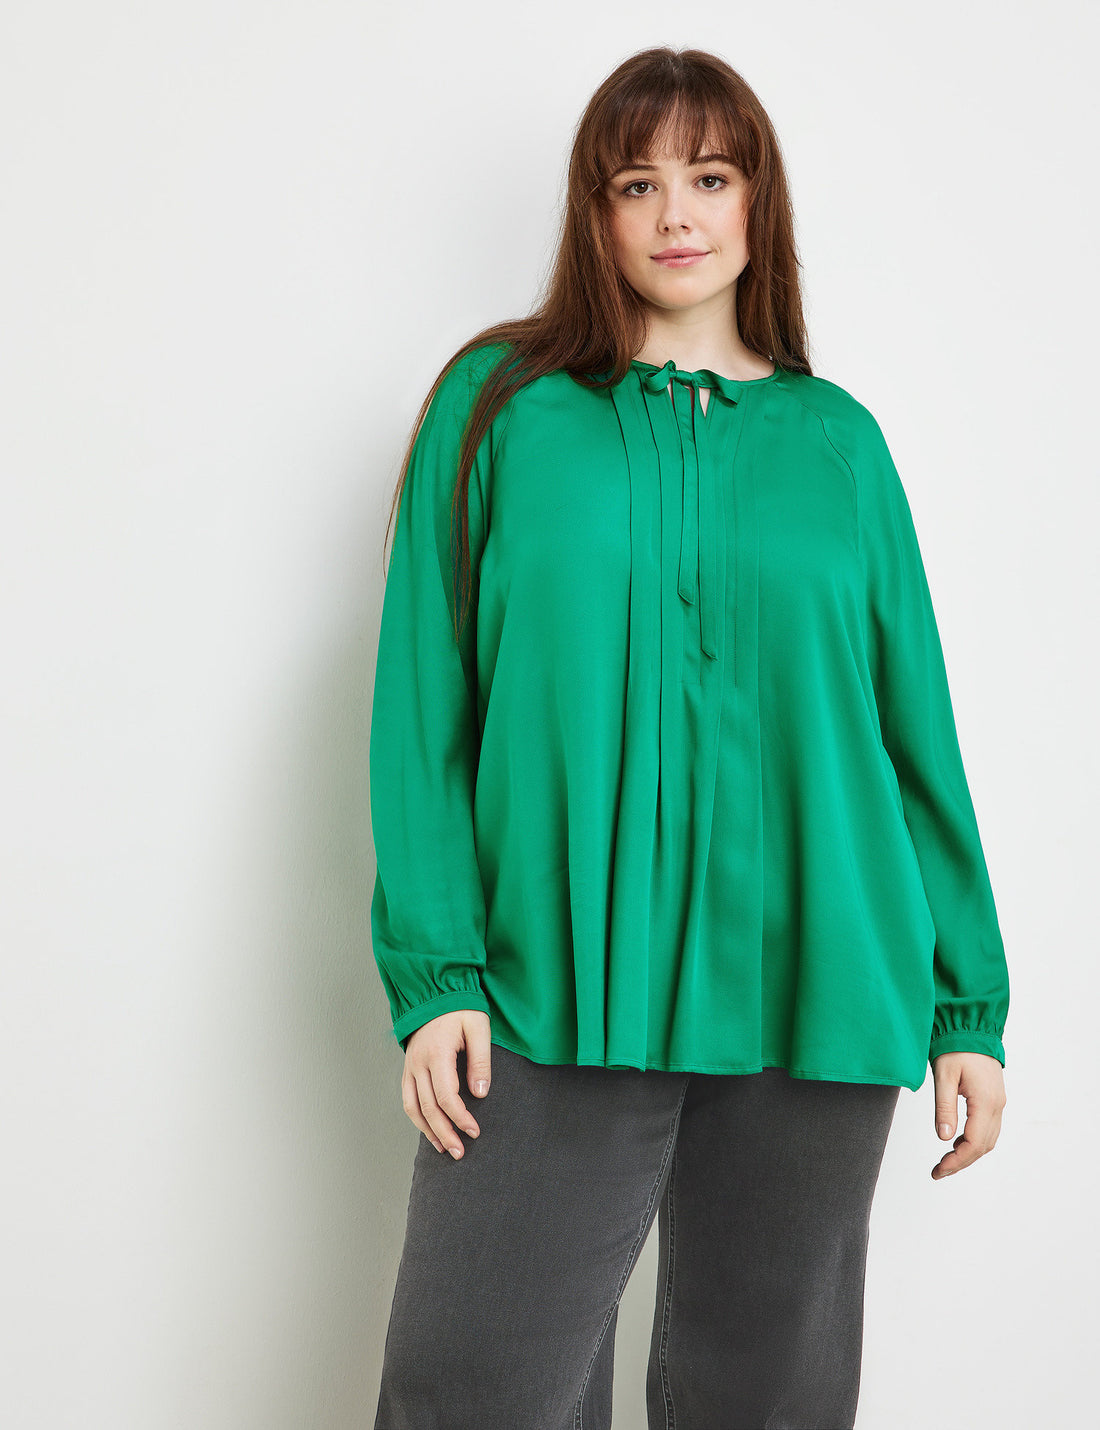 Blouse With A Pintuck Panel_360207-21212_5550_01